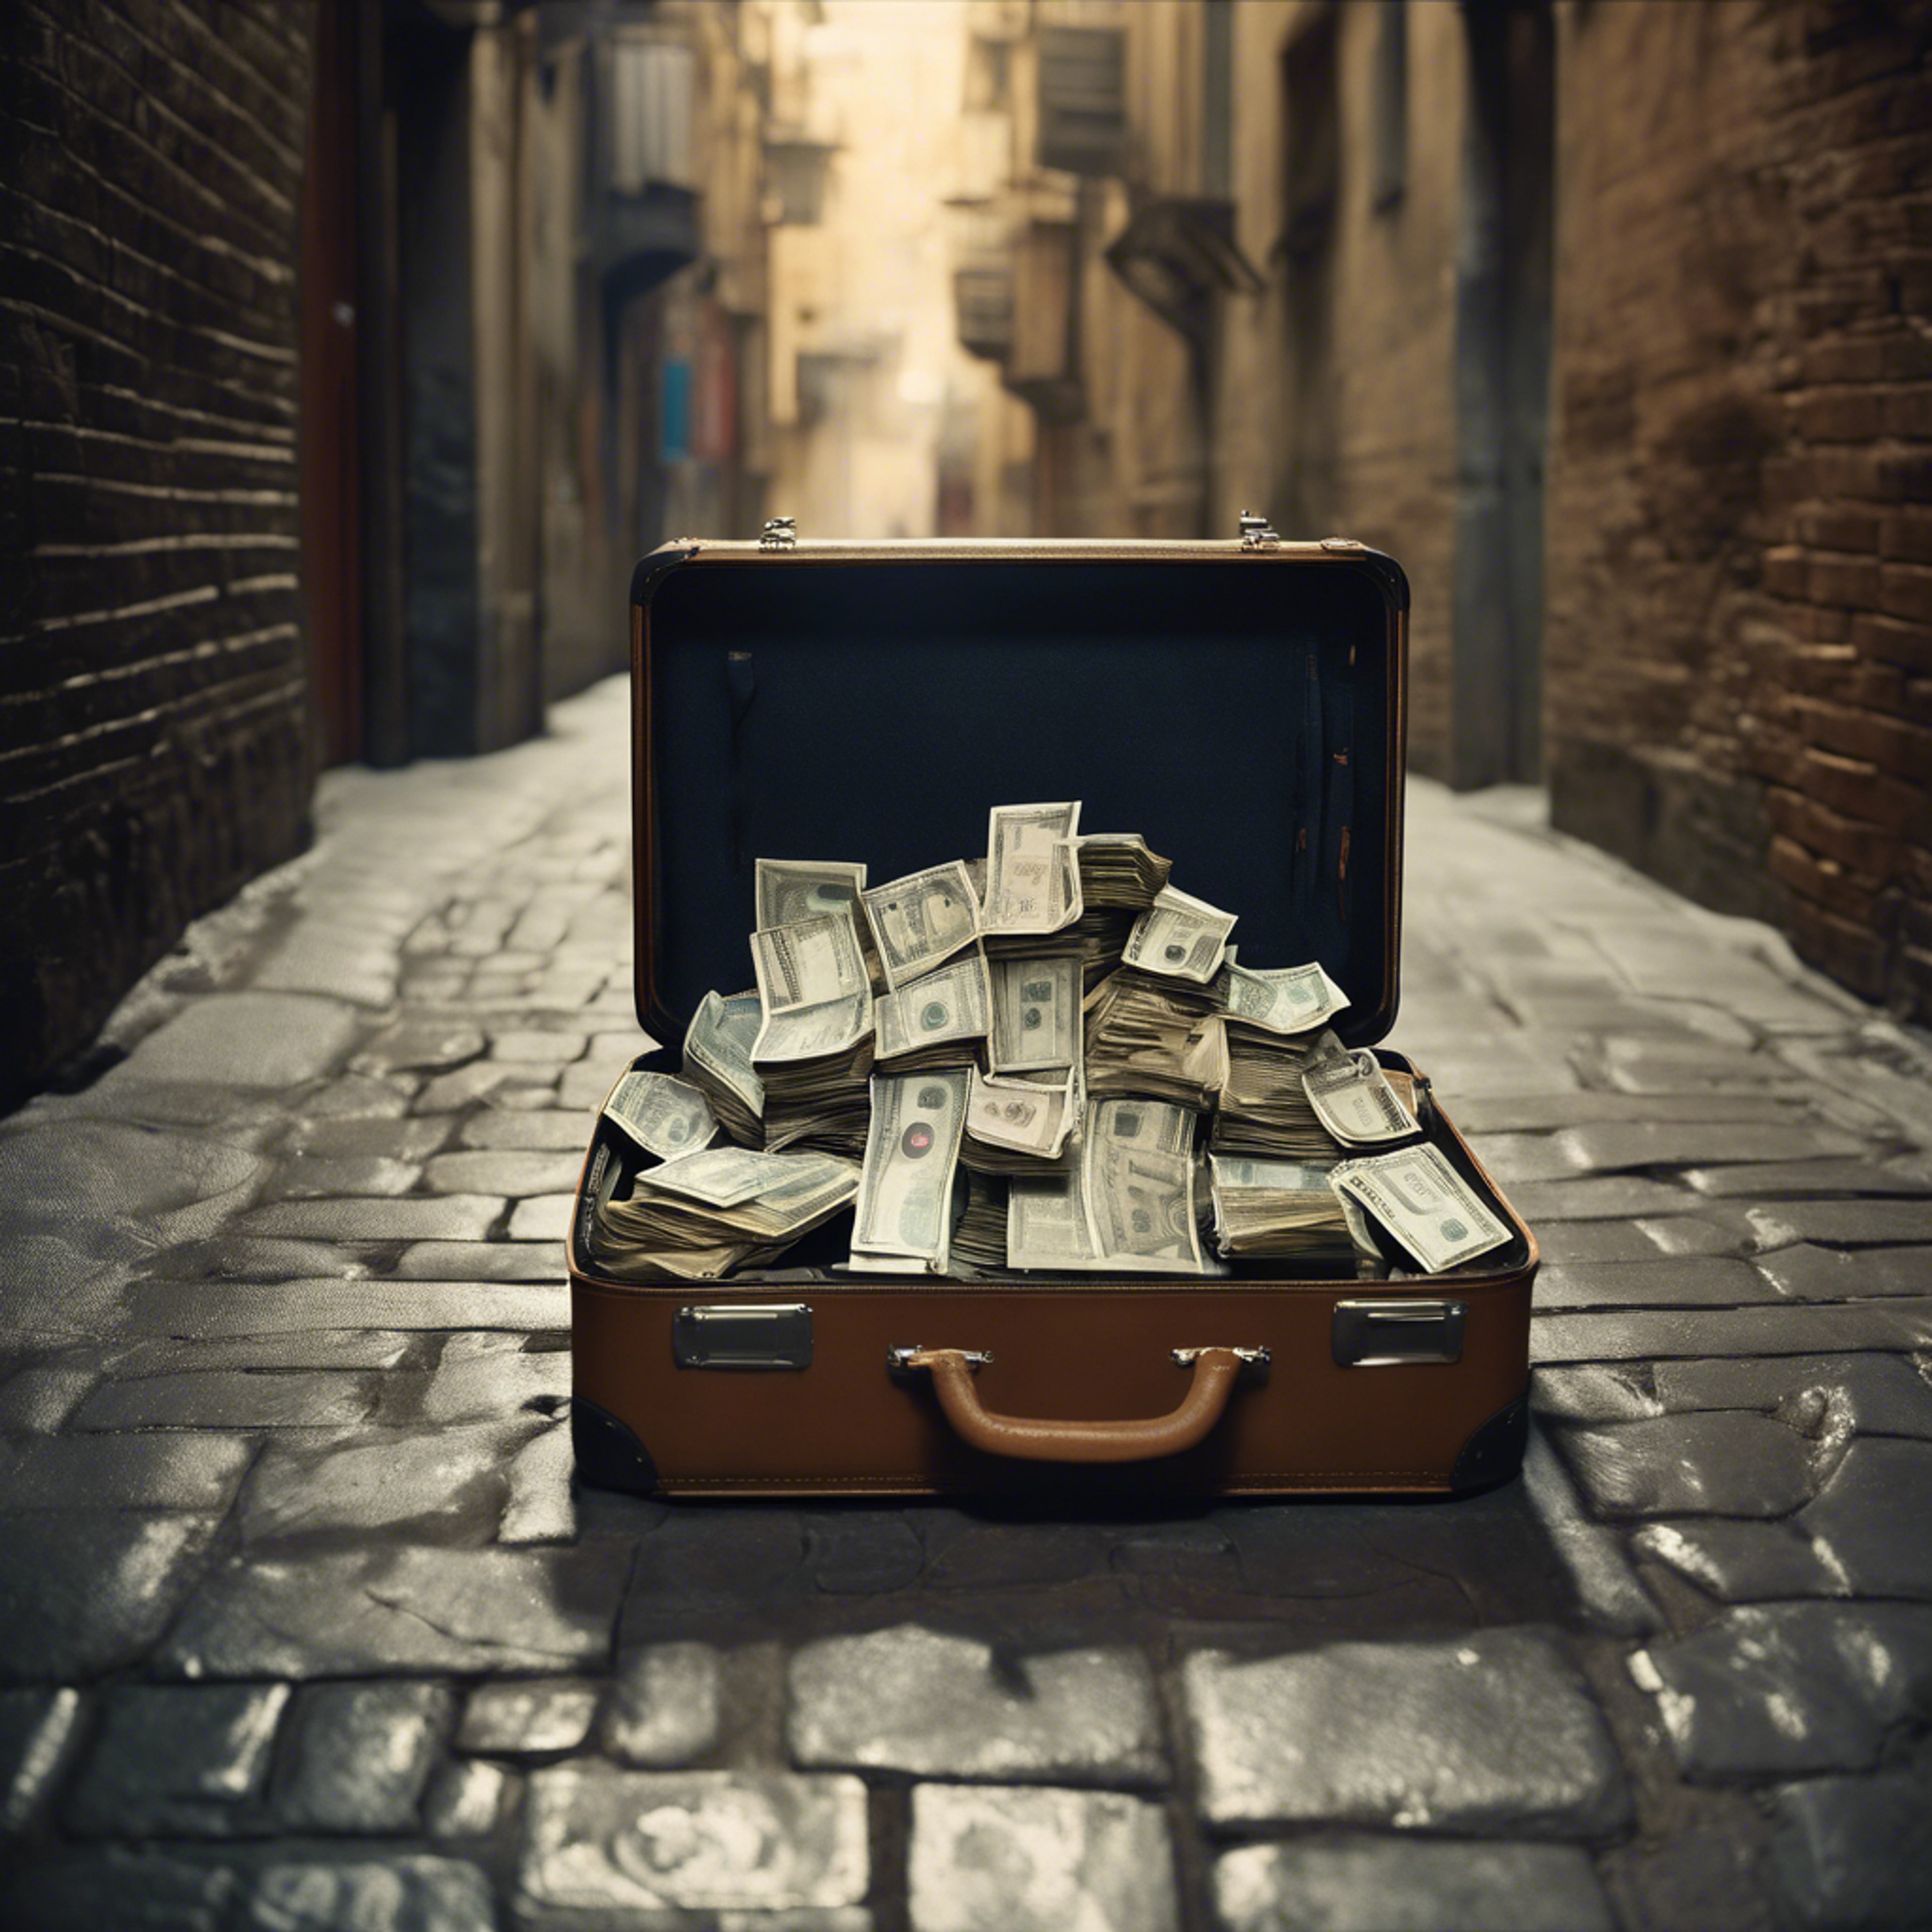 A suitcase filled with mafia money being exchanged in dimly lit alleyway. Tapeta[001aead7b2c840f5bbce]